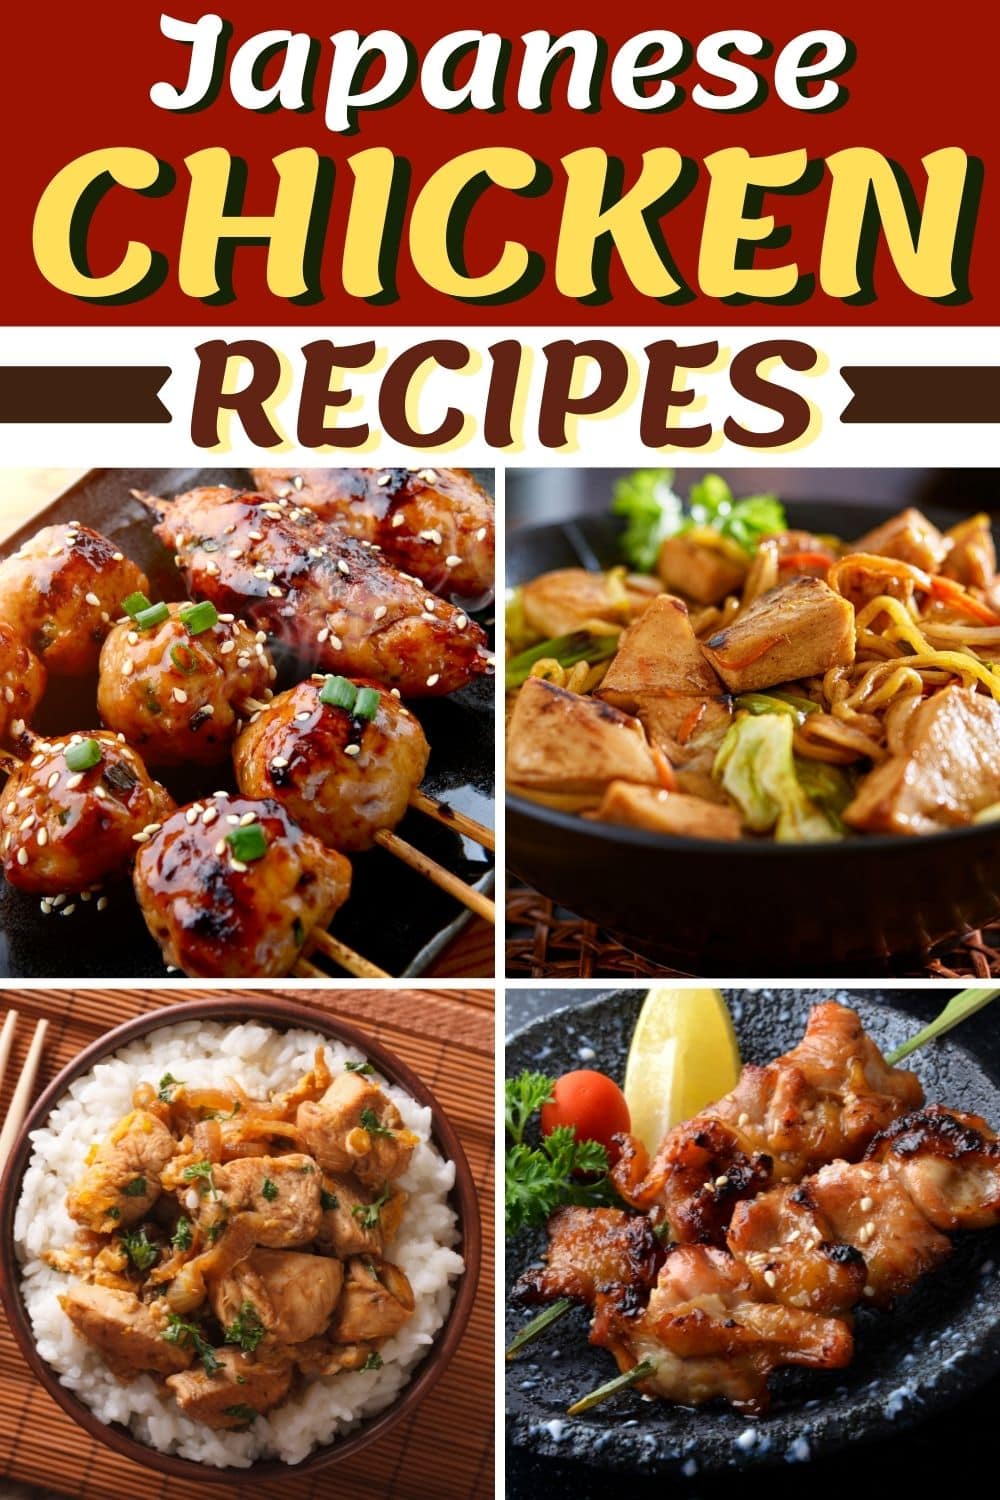 17 Easy Japanese Chicken Recipes to Try for Dinner - Insanely Good